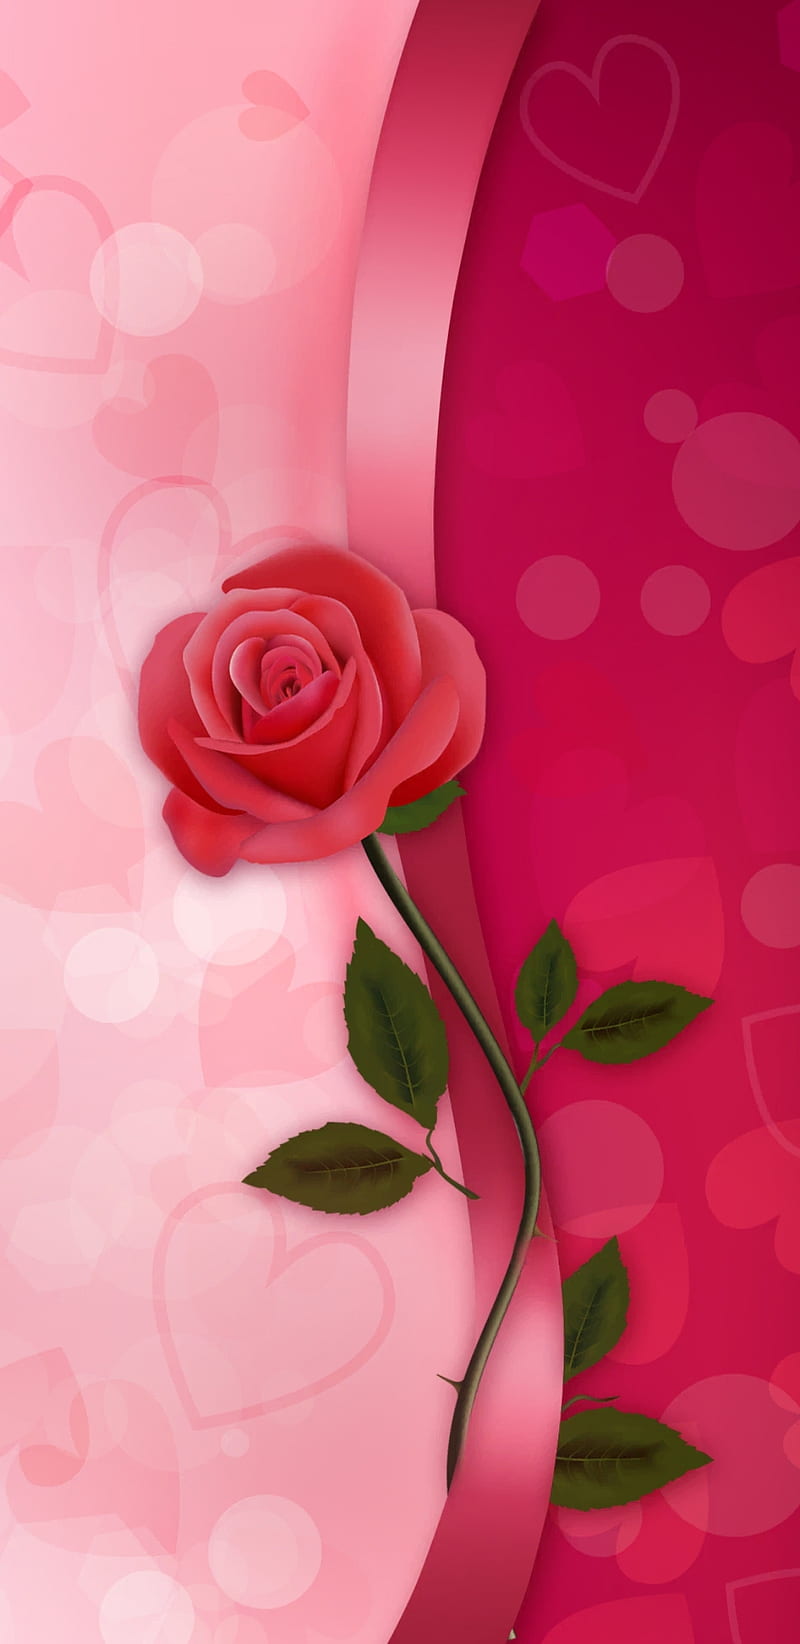 RibbonNRose, flowers, heart, corazones, love, pink, red, ribbons, rose, roses, valentine, HD phone wallpaper